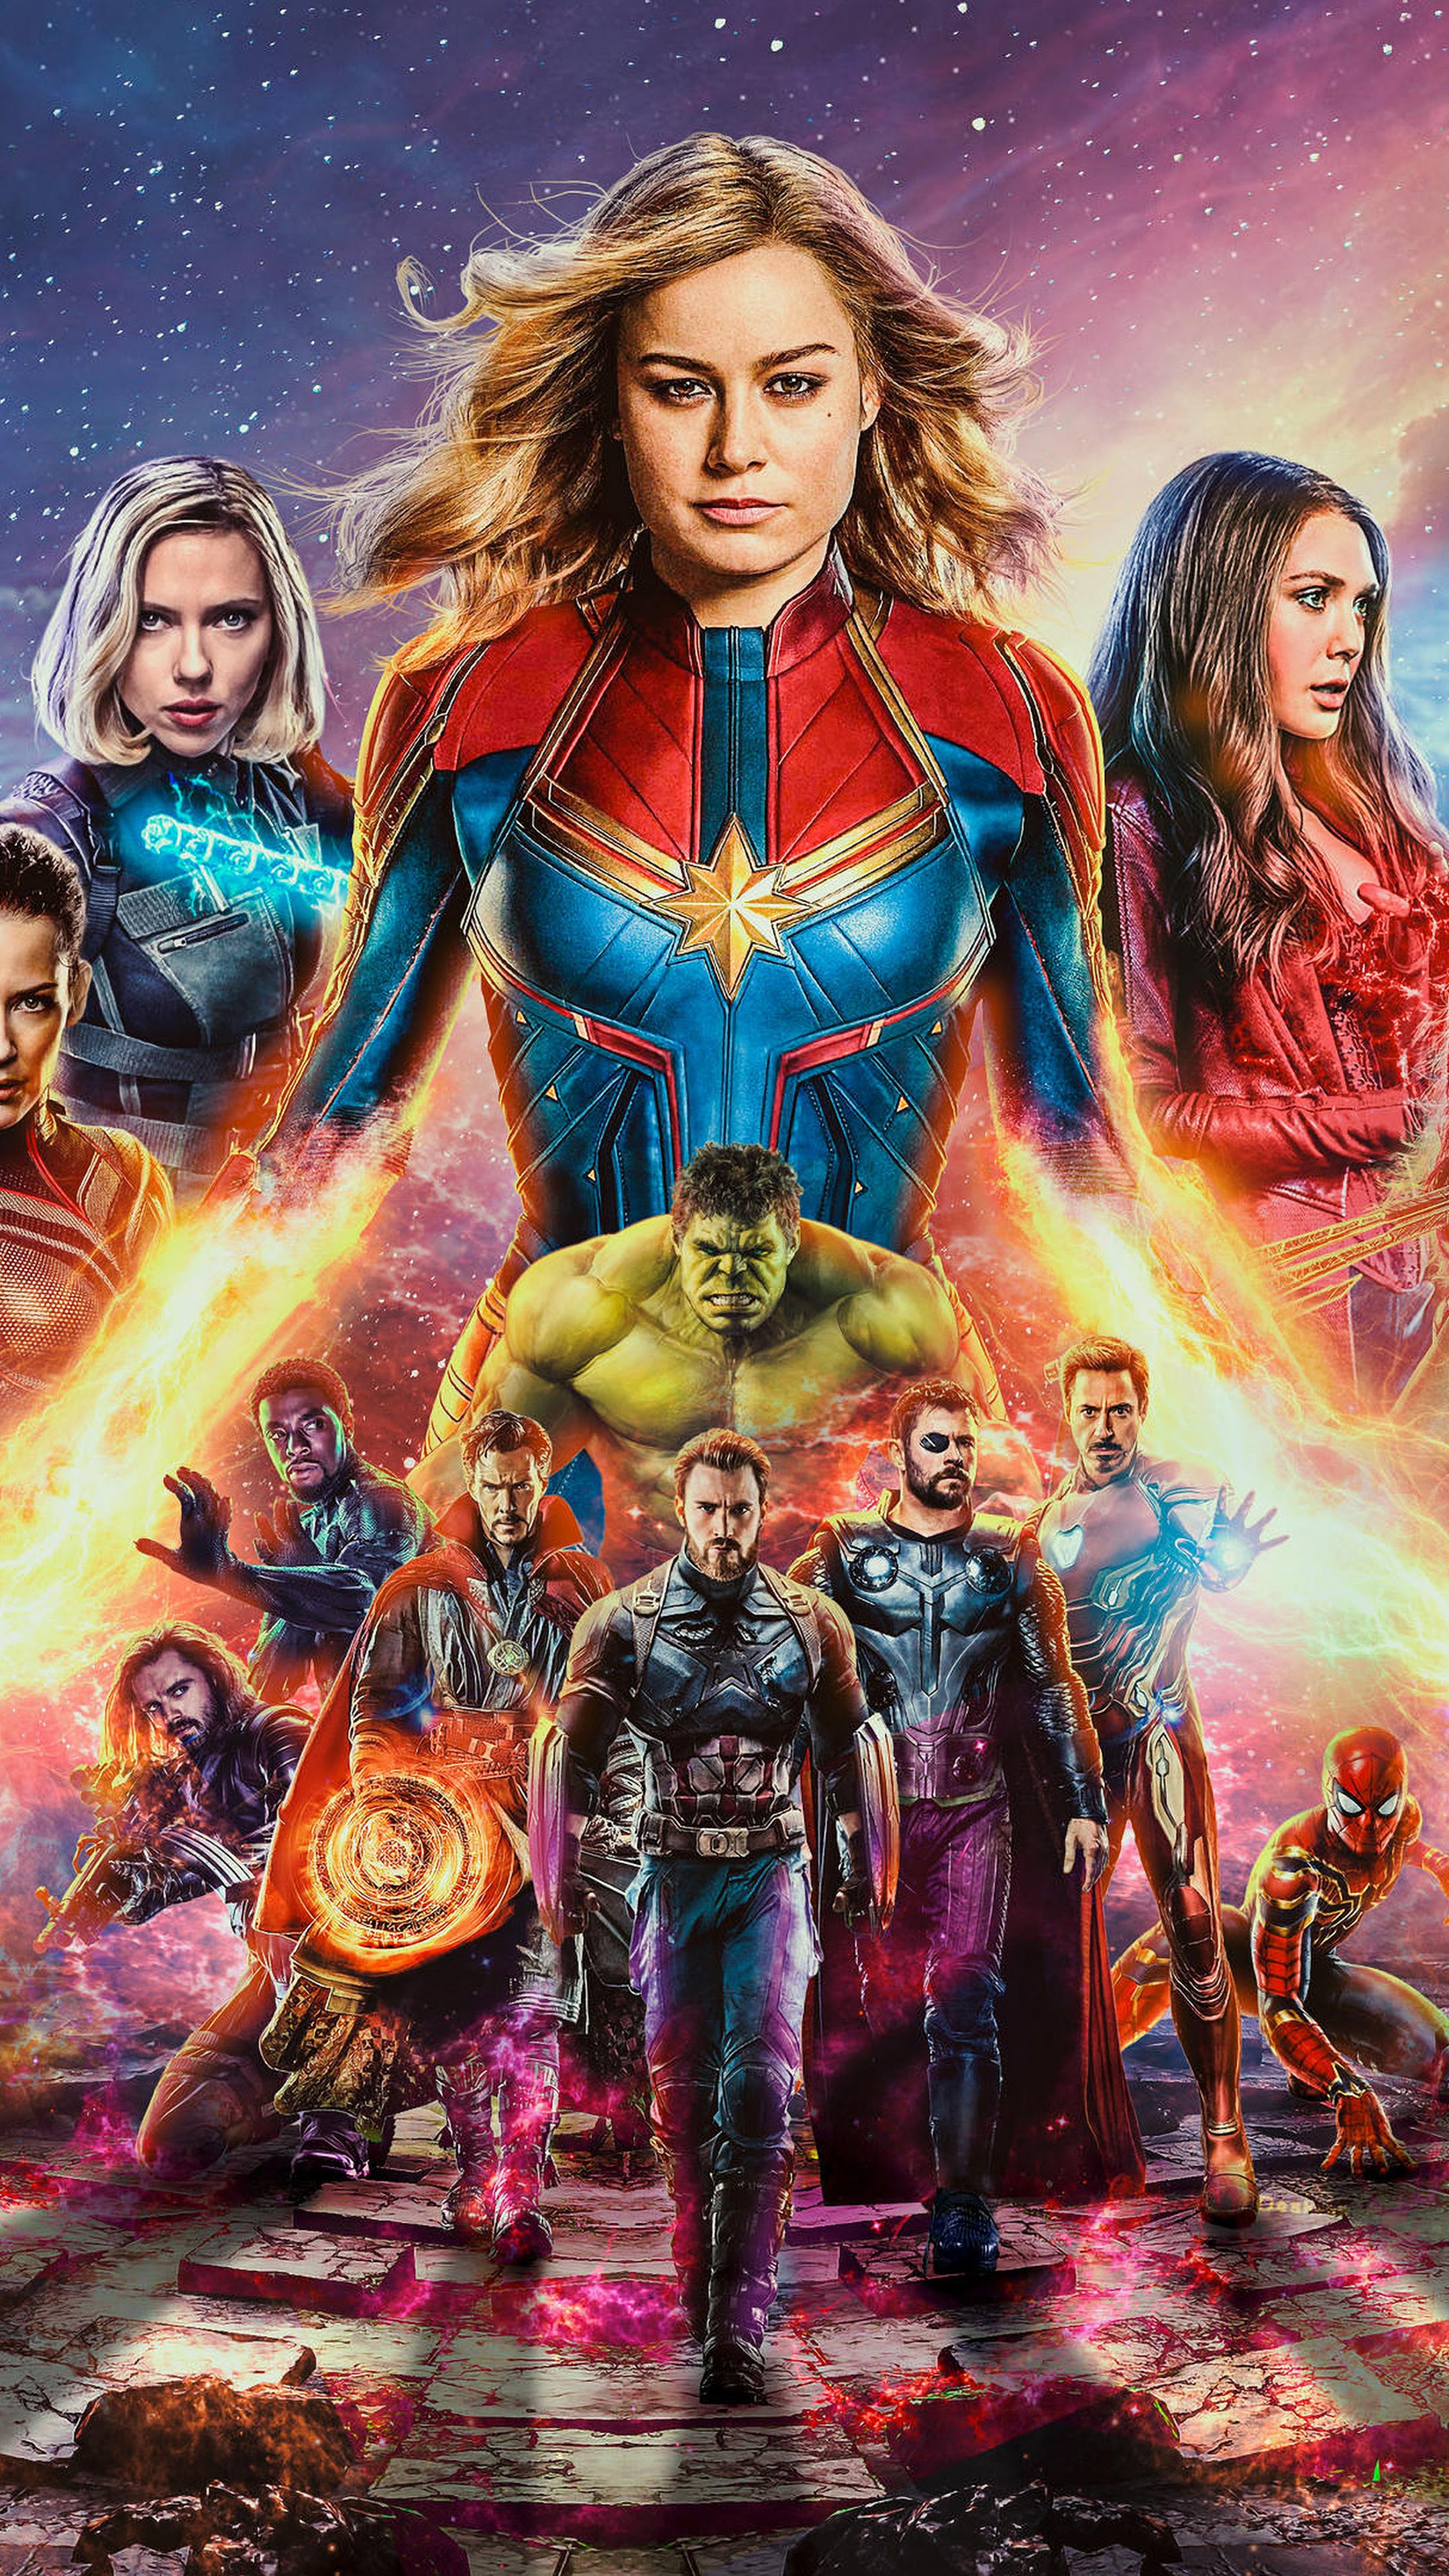 Endgame Marvel Characters Avengers Endgame Posters Reveal The Full List Of Victims And